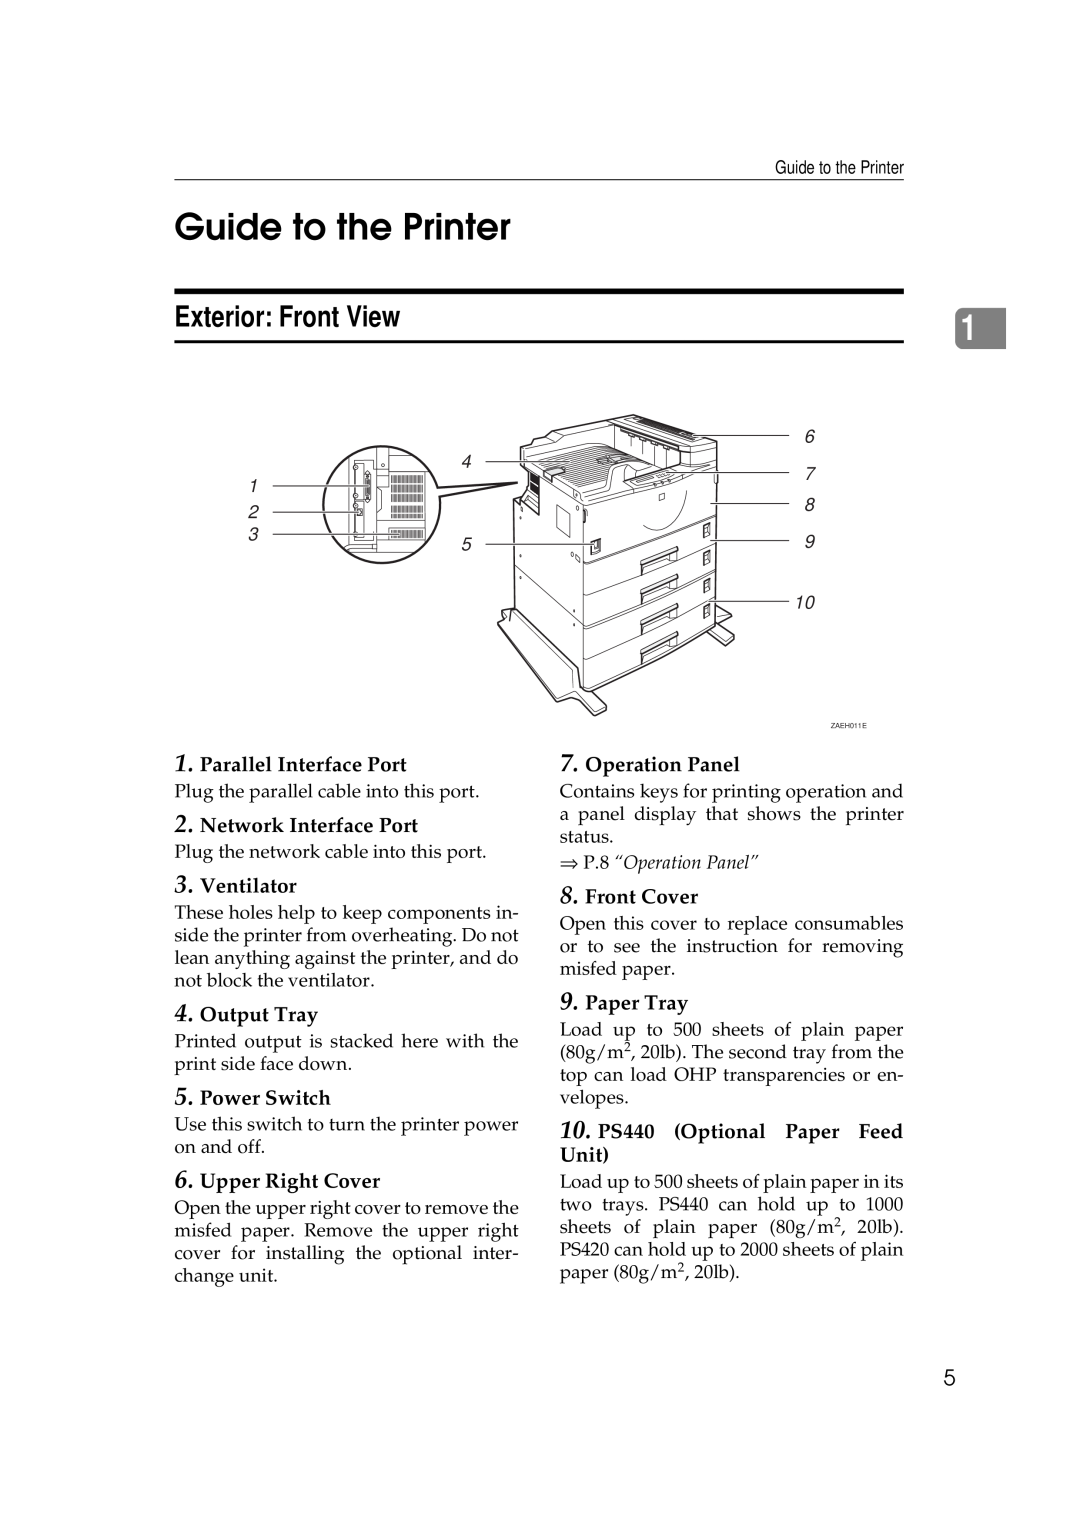 Ricoh Aficio AP2700 operating instructions Guide to the Printer, Exterior Front View 